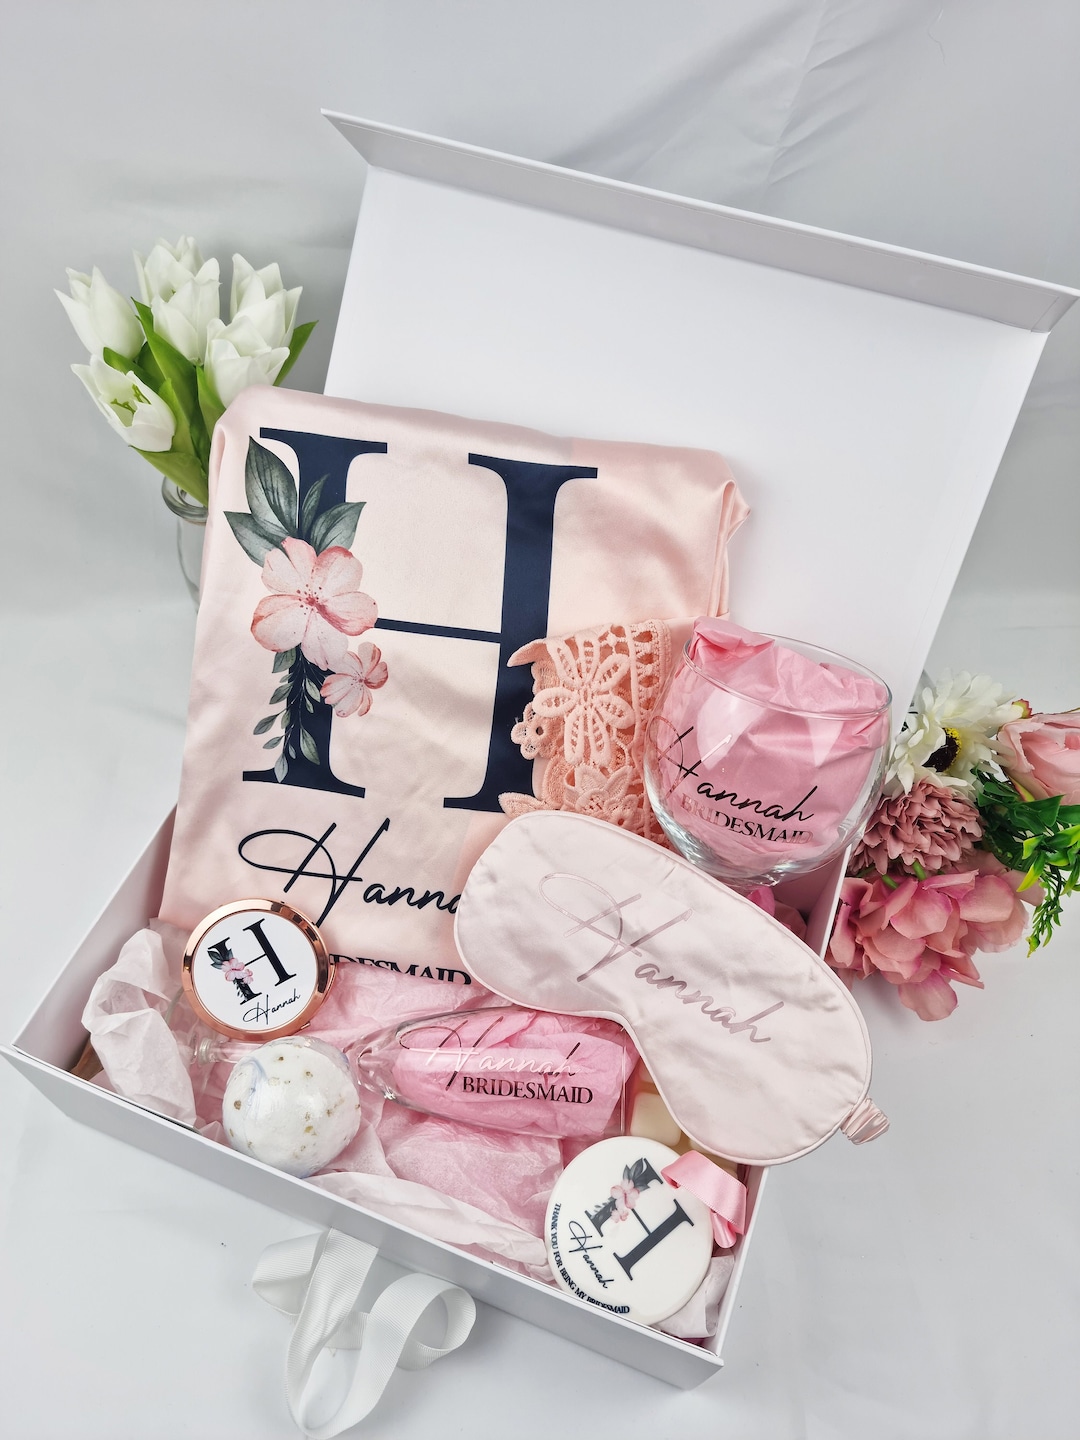 Bride-to-be-gifts, bridesmaid gift boxes and wedding gifts! Find the  perfect wedding gift basket to celebrate! - Baskits Inc.